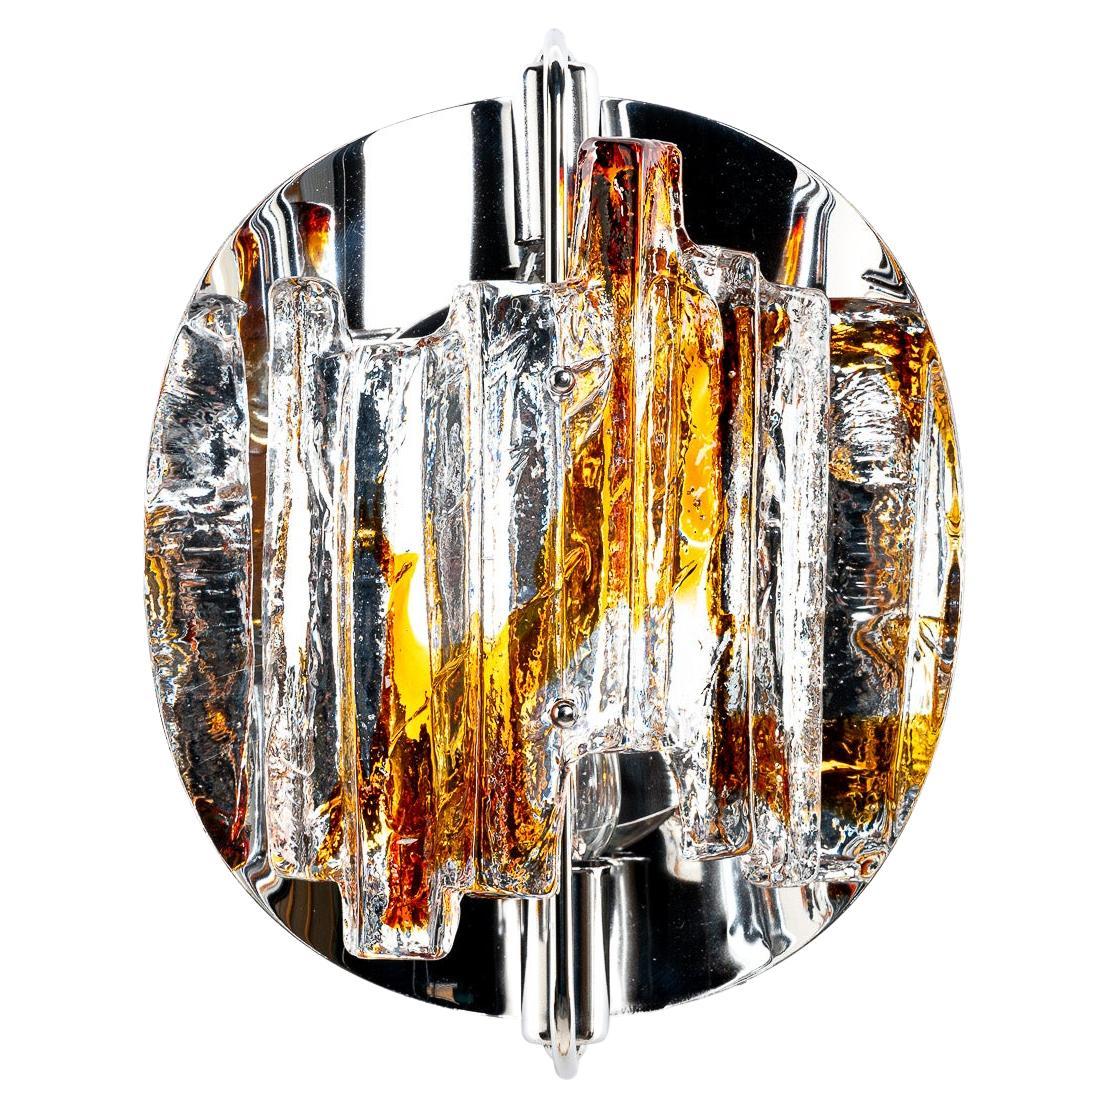 1970's Chrome & Glass Wall Light Attributed to Mazzega